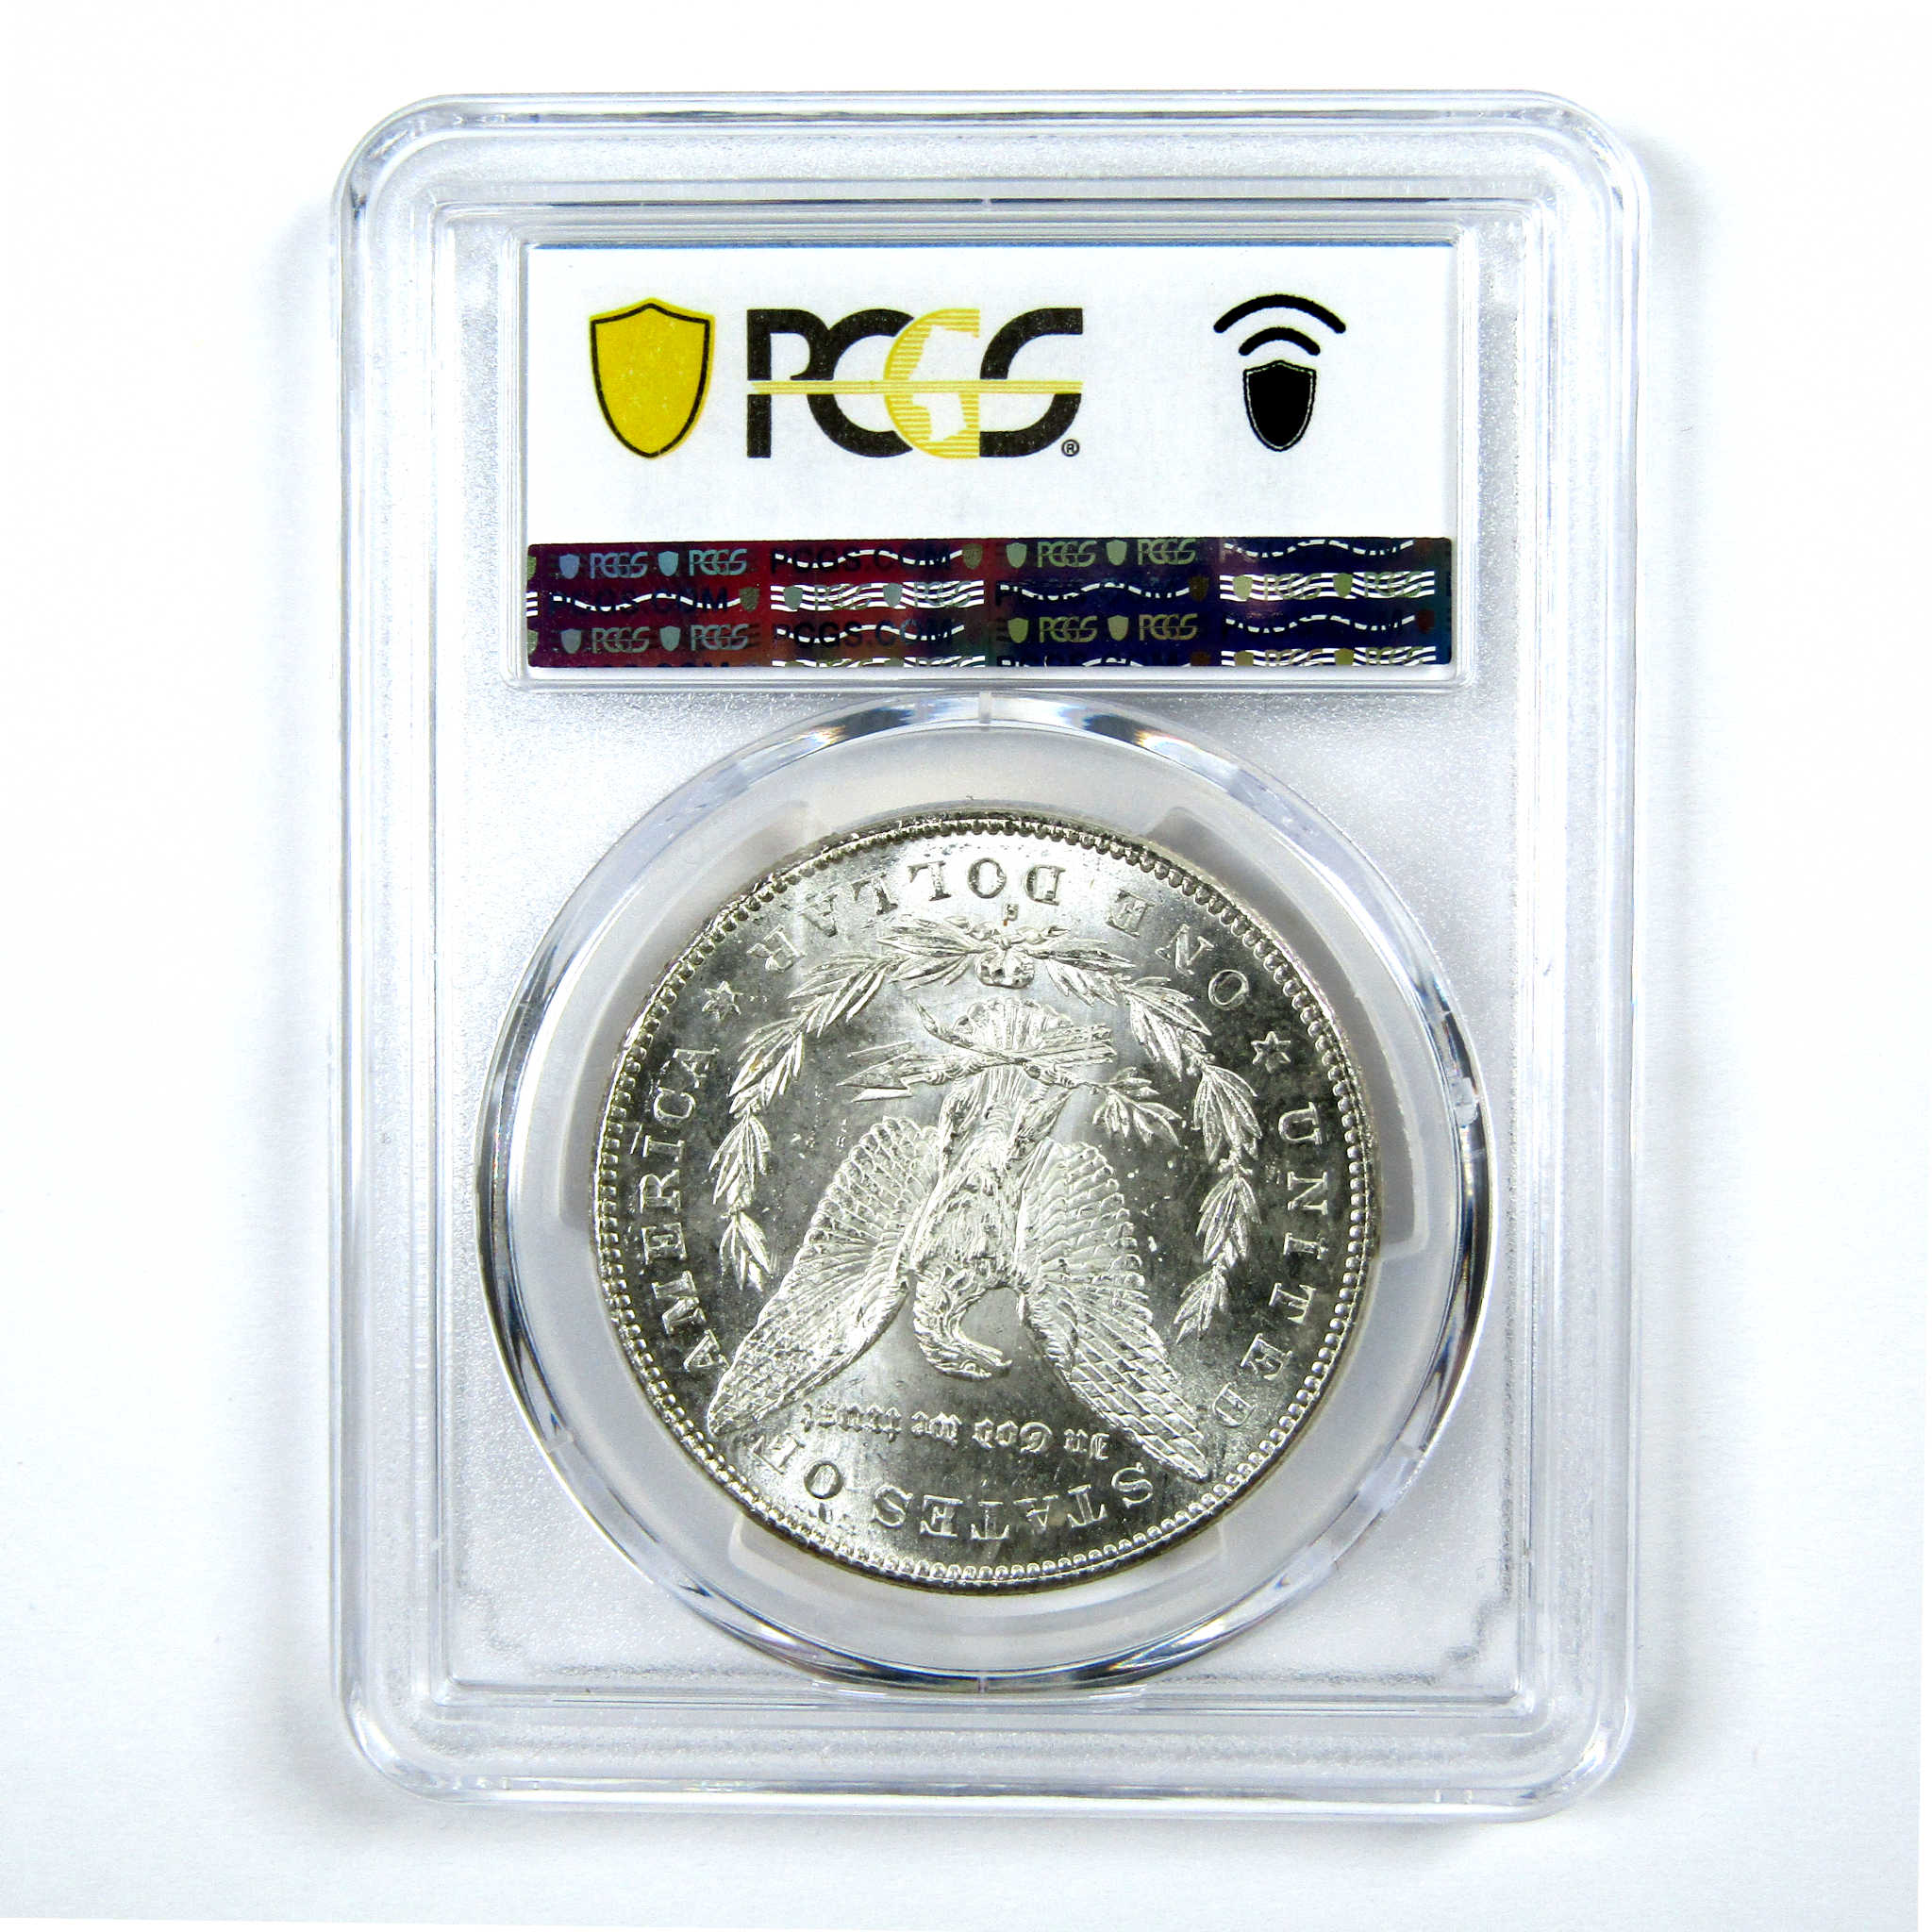 1878 S Morgan Dollar MS 63 PCGS Silver $1 Uncirculated Coin SKU:I13917 - Morgan coin - Morgan silver dollar - Morgan silver dollar for sale - Profile Coins &amp; Collectibles